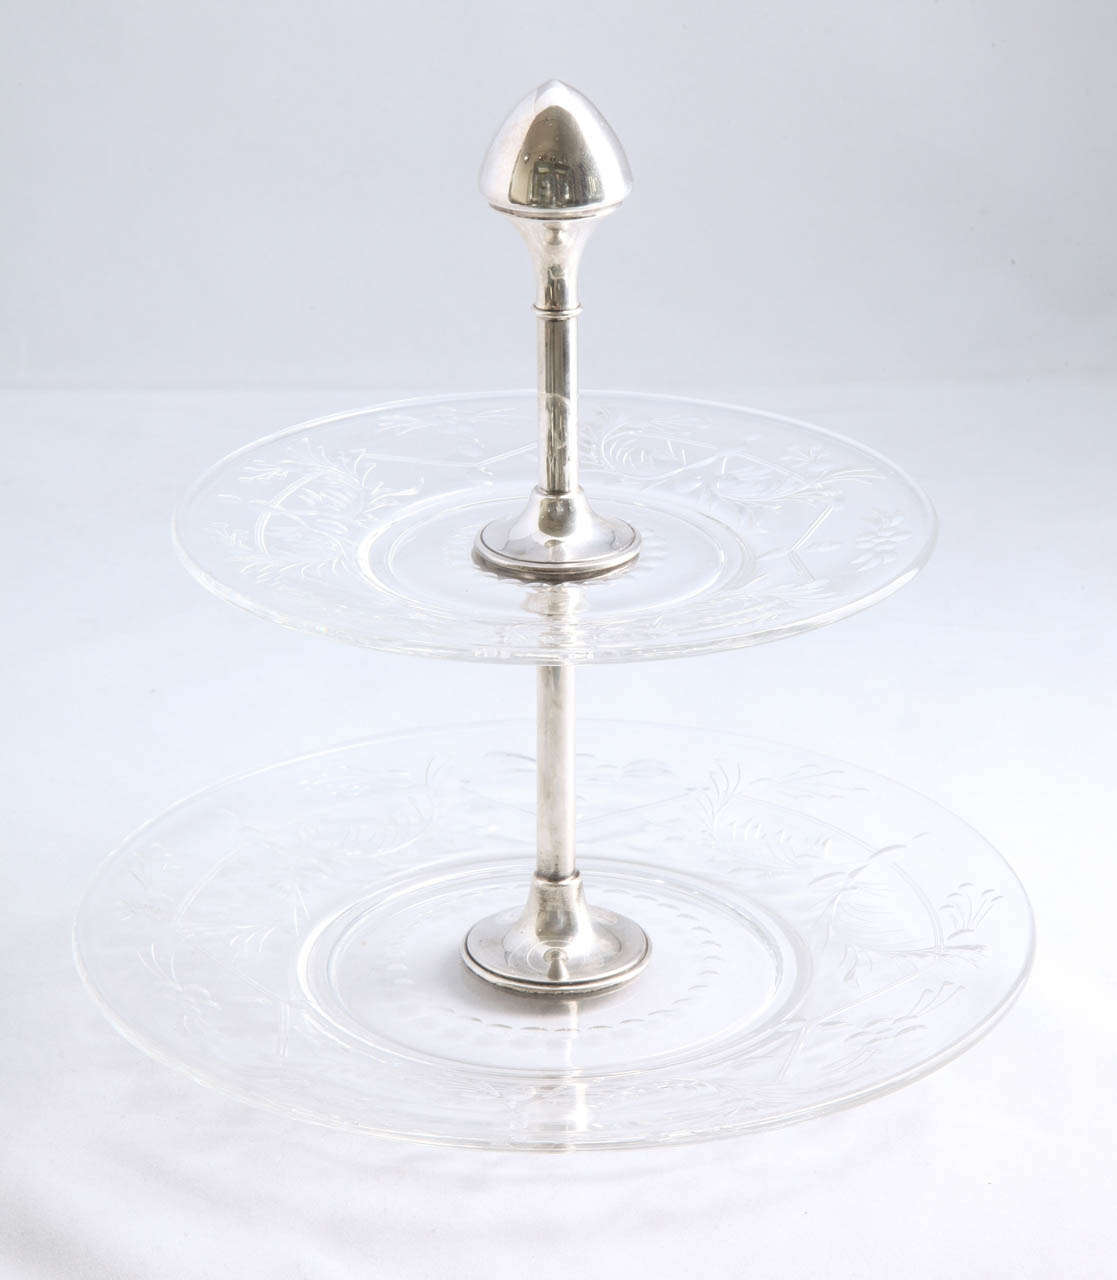 Sterling silver-mounted, wheel-cut, double tiered serving stand, The Hawkes Company, New York, Ca.1910. @8 3/4